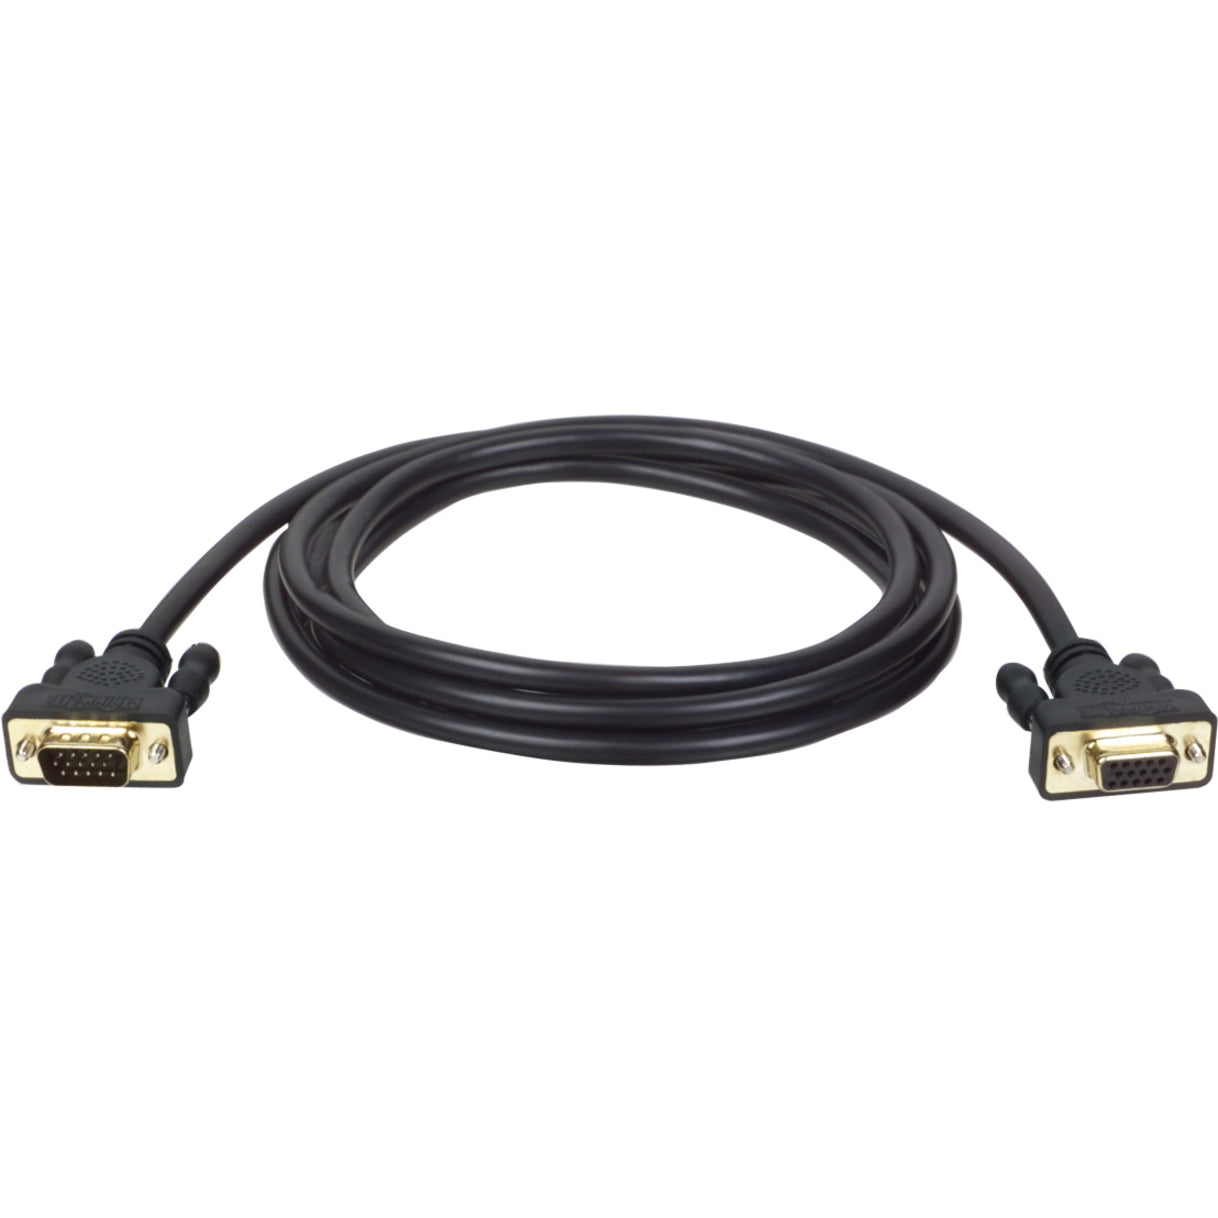 Tripp Lite P510-025 VGA Extension Gold Cable, 25 ft, HD-15 Male to HD-15 Female